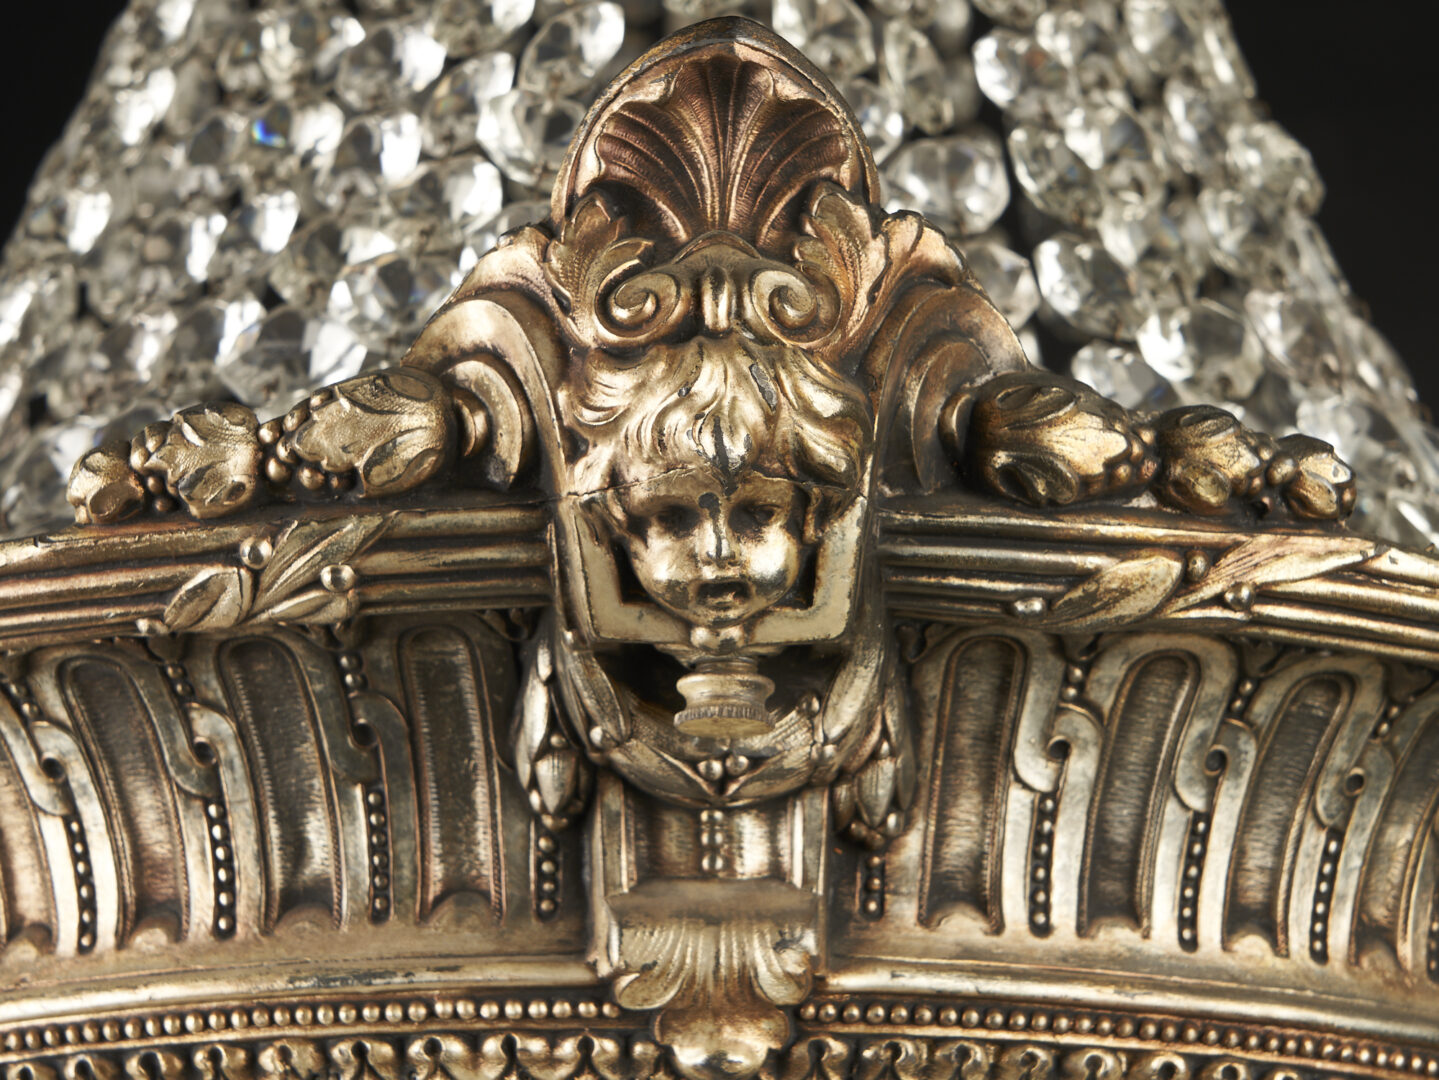 Lot 210: French Empire Style 'Sac a Pearl' Chandelier